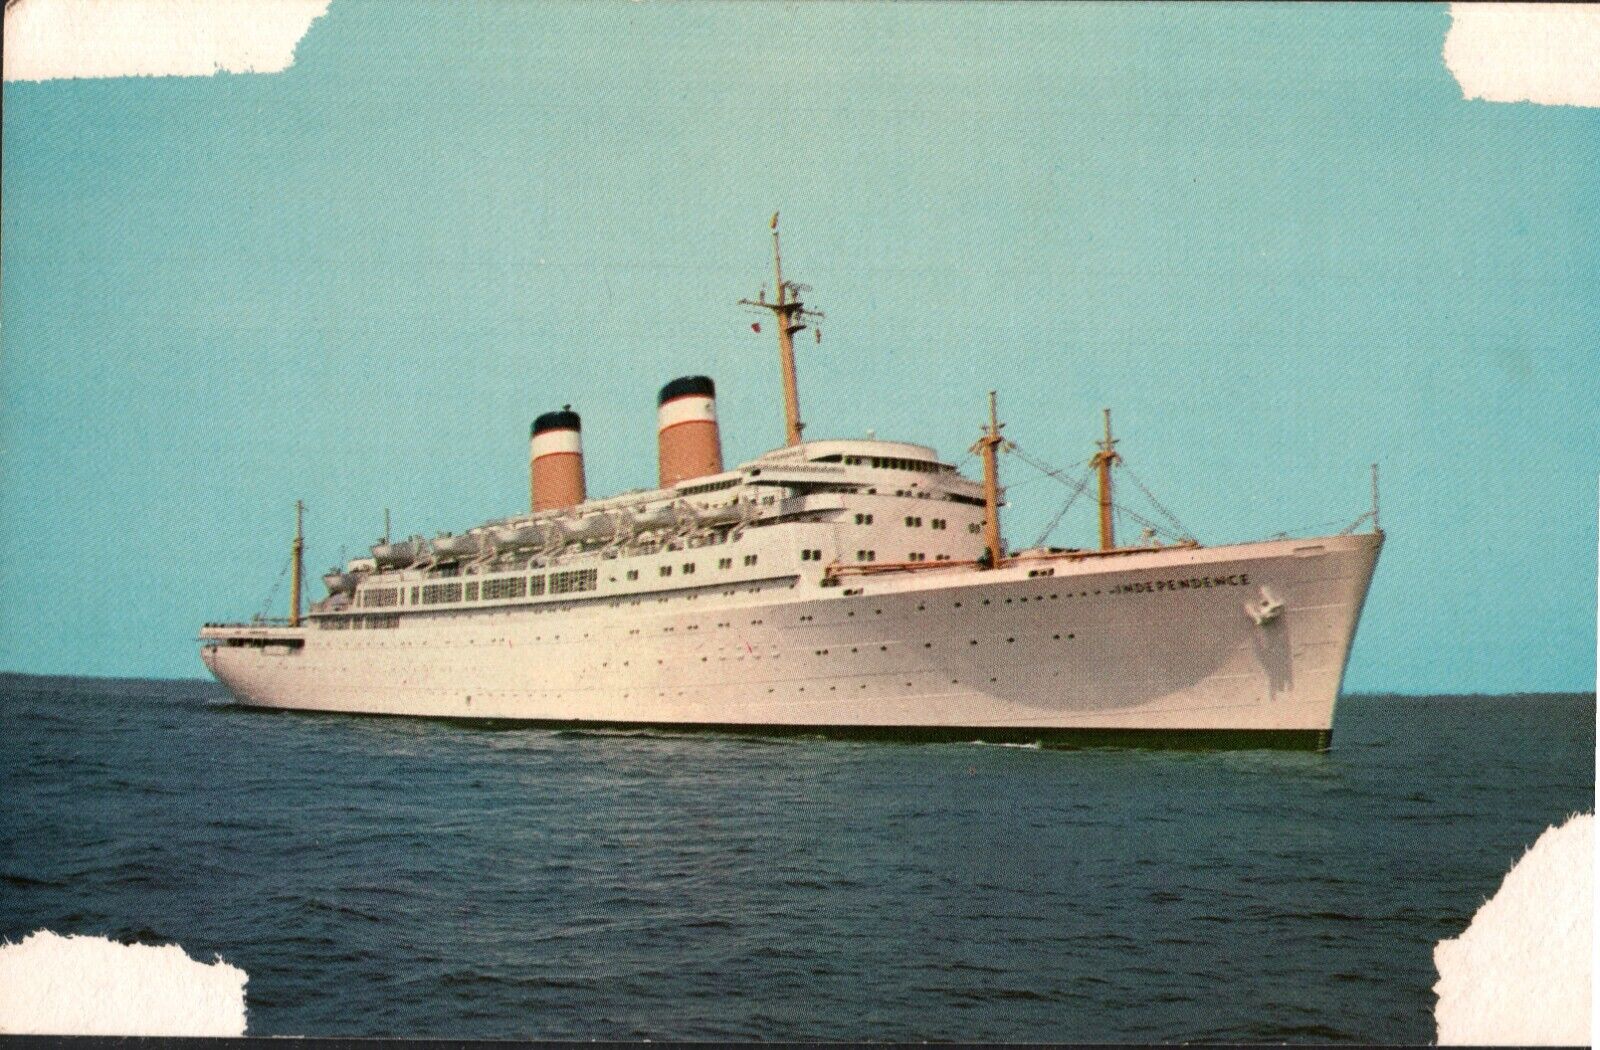 Posted Postcard of S.S. Independence Liner. Litho.